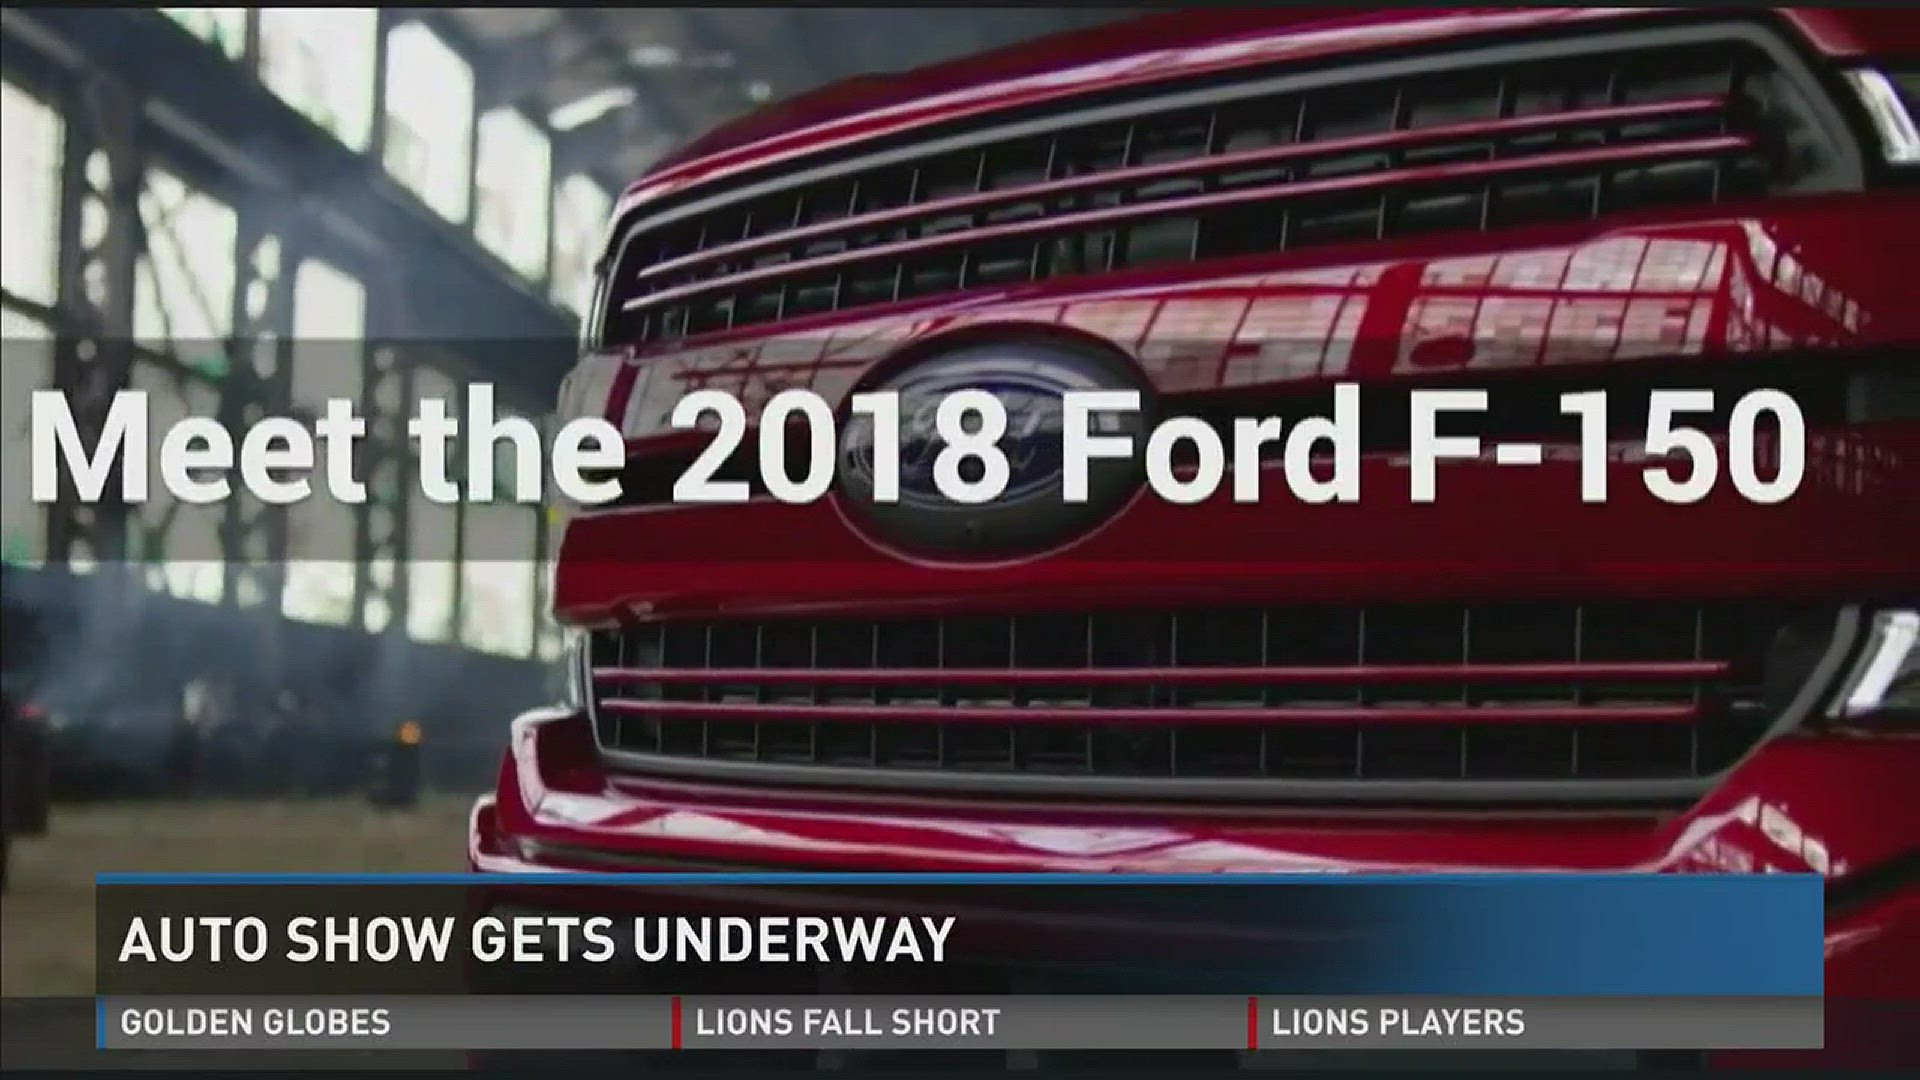 Ford announced plans to refresh its popular F-150 truck.